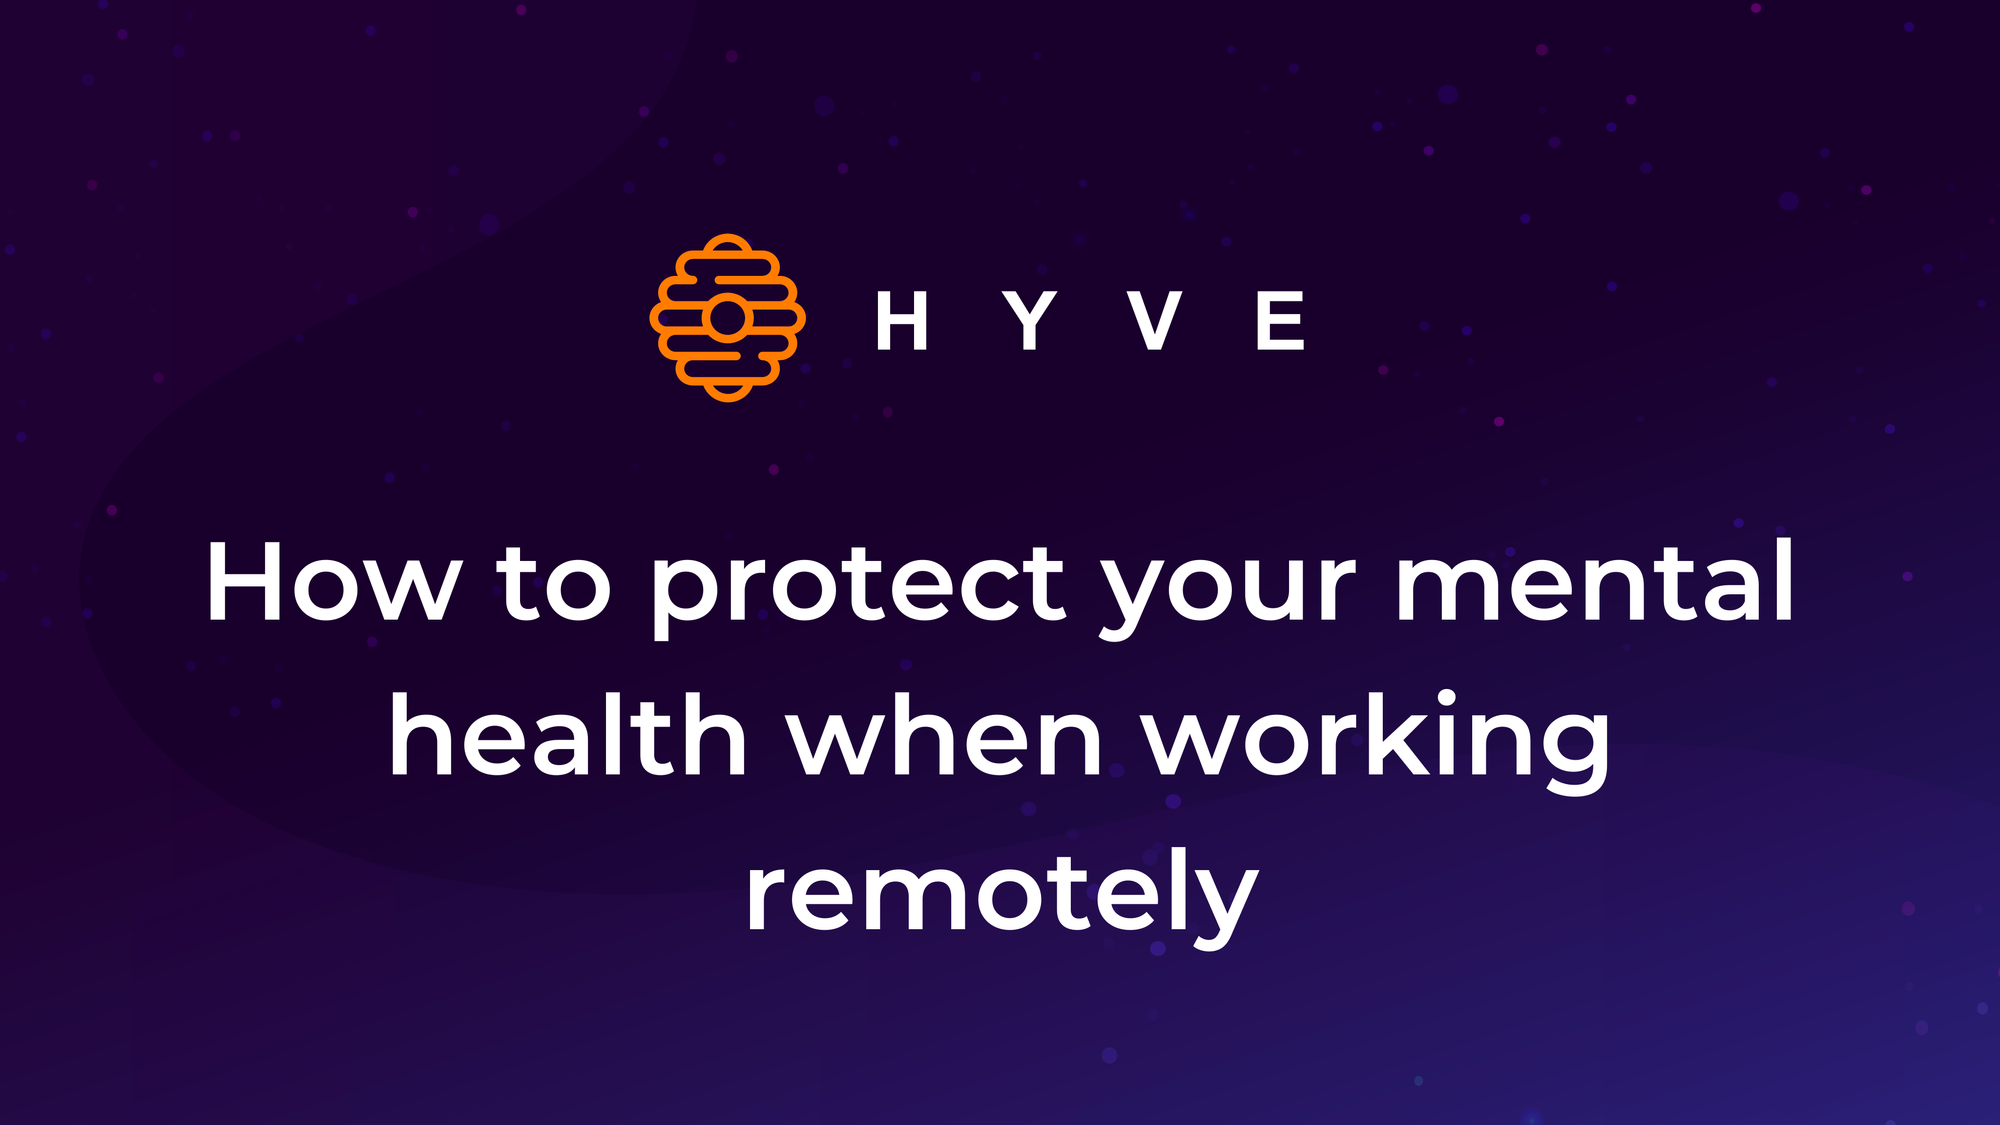 How to protect your mental health when working remotely